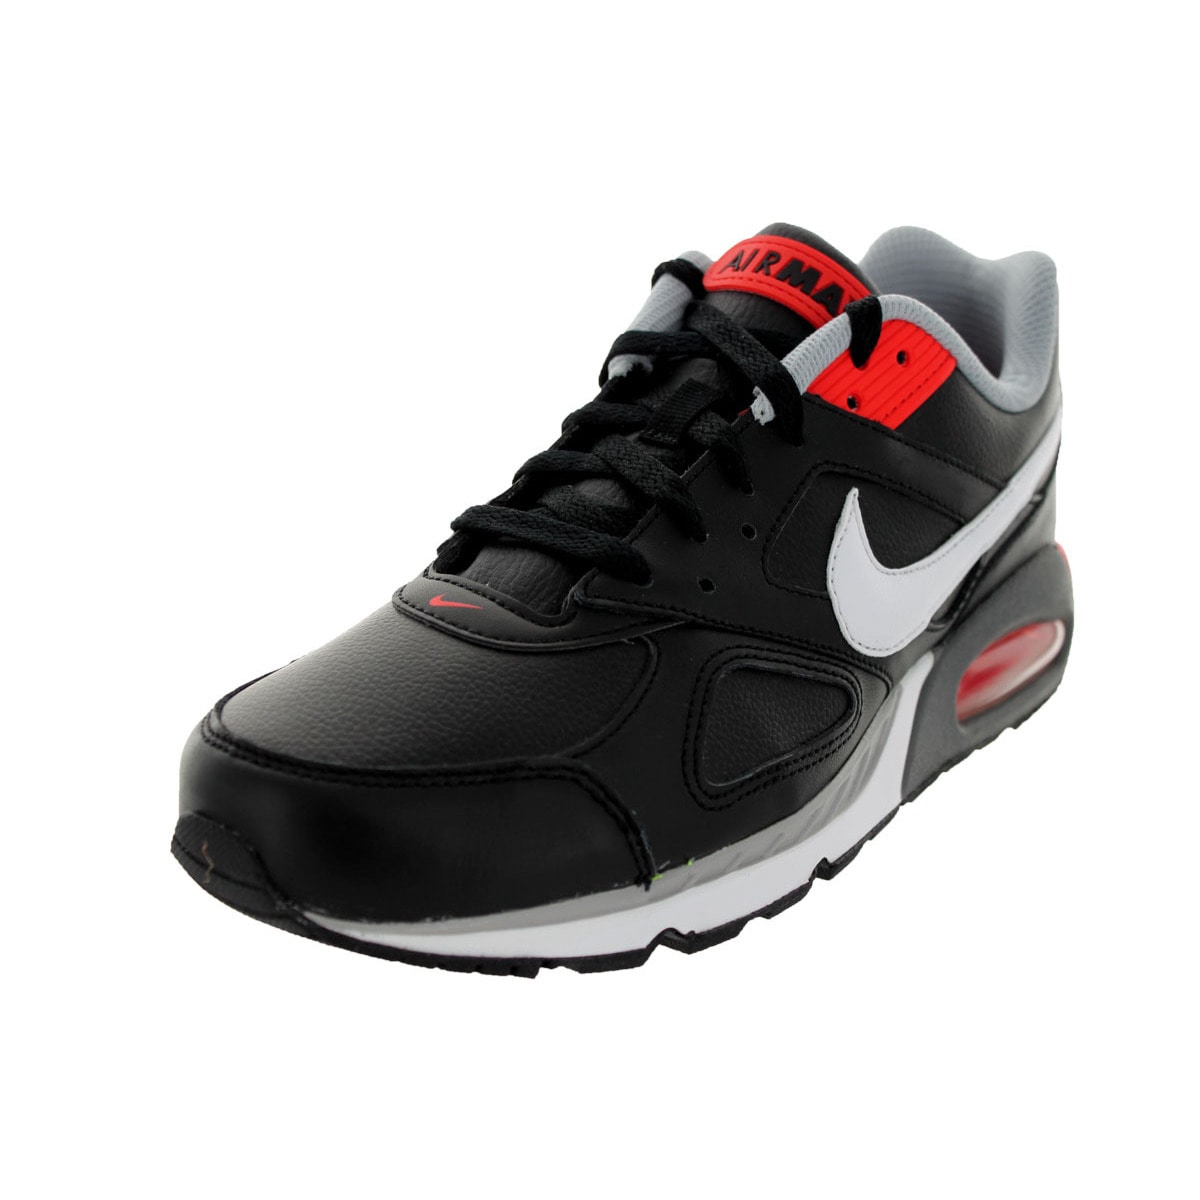 Shop Nike Men's Air Max IVO LTR Black, White, Light Crimson, Wolf Grey  Leather Running Shoes Size 9 - Overstock - 13404798